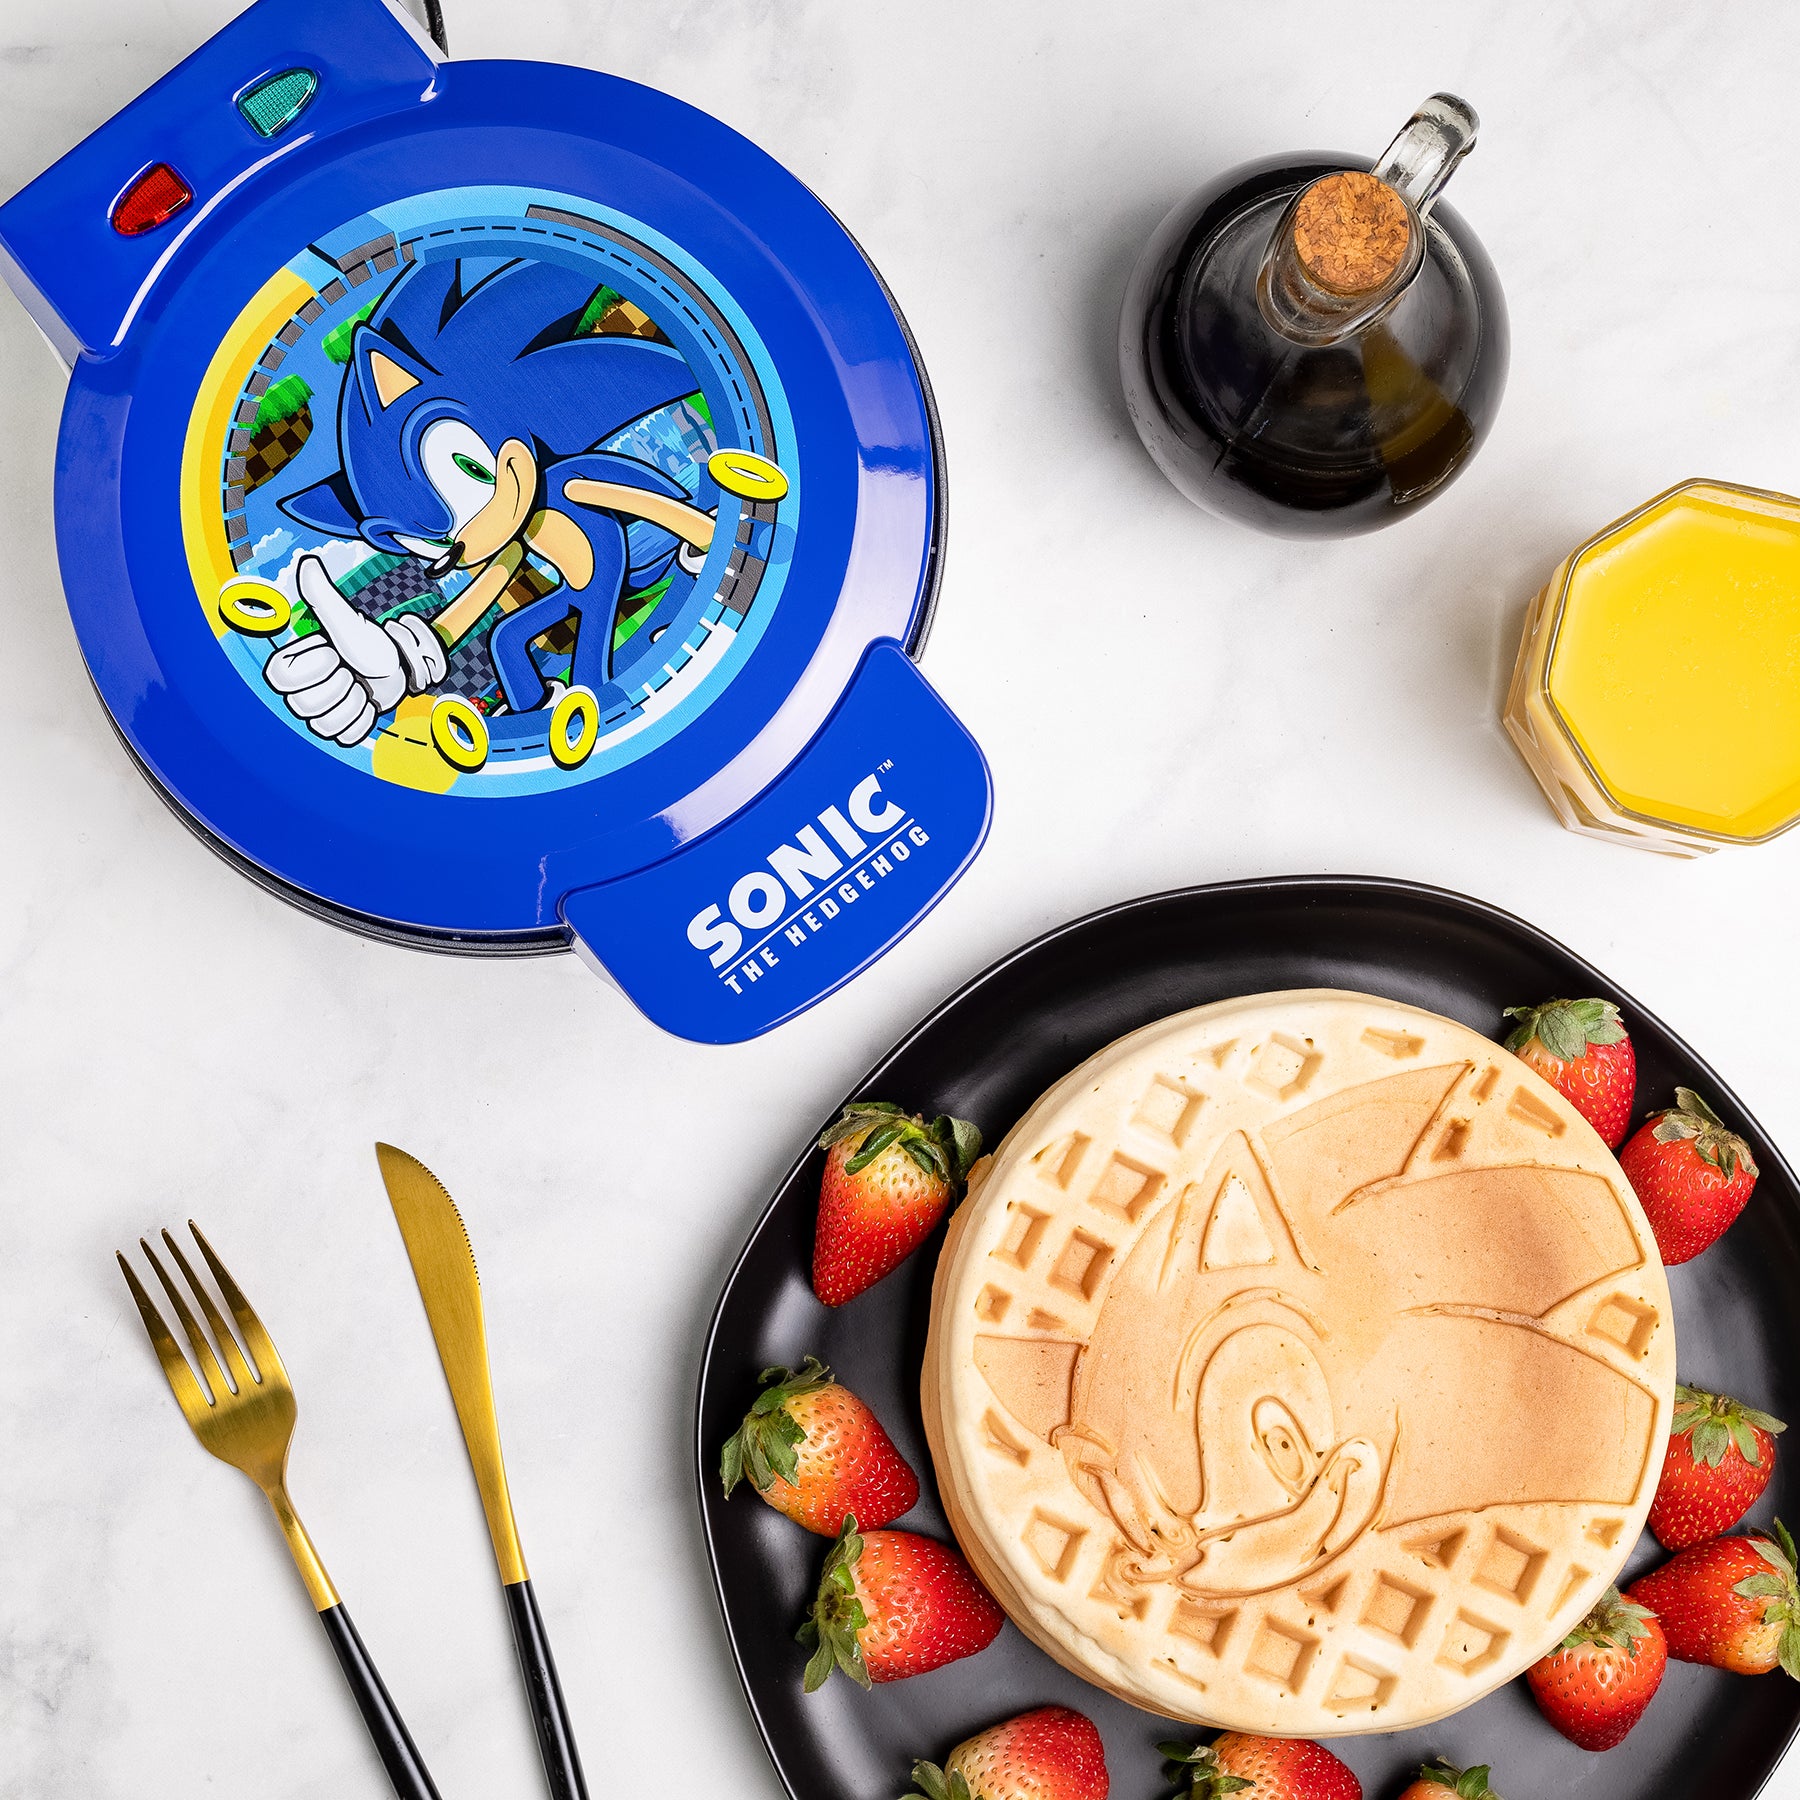 SEGA of America Teams Up with Uncanny Brands to Launch the Sonic the Hedgehog™ Waffle Maker